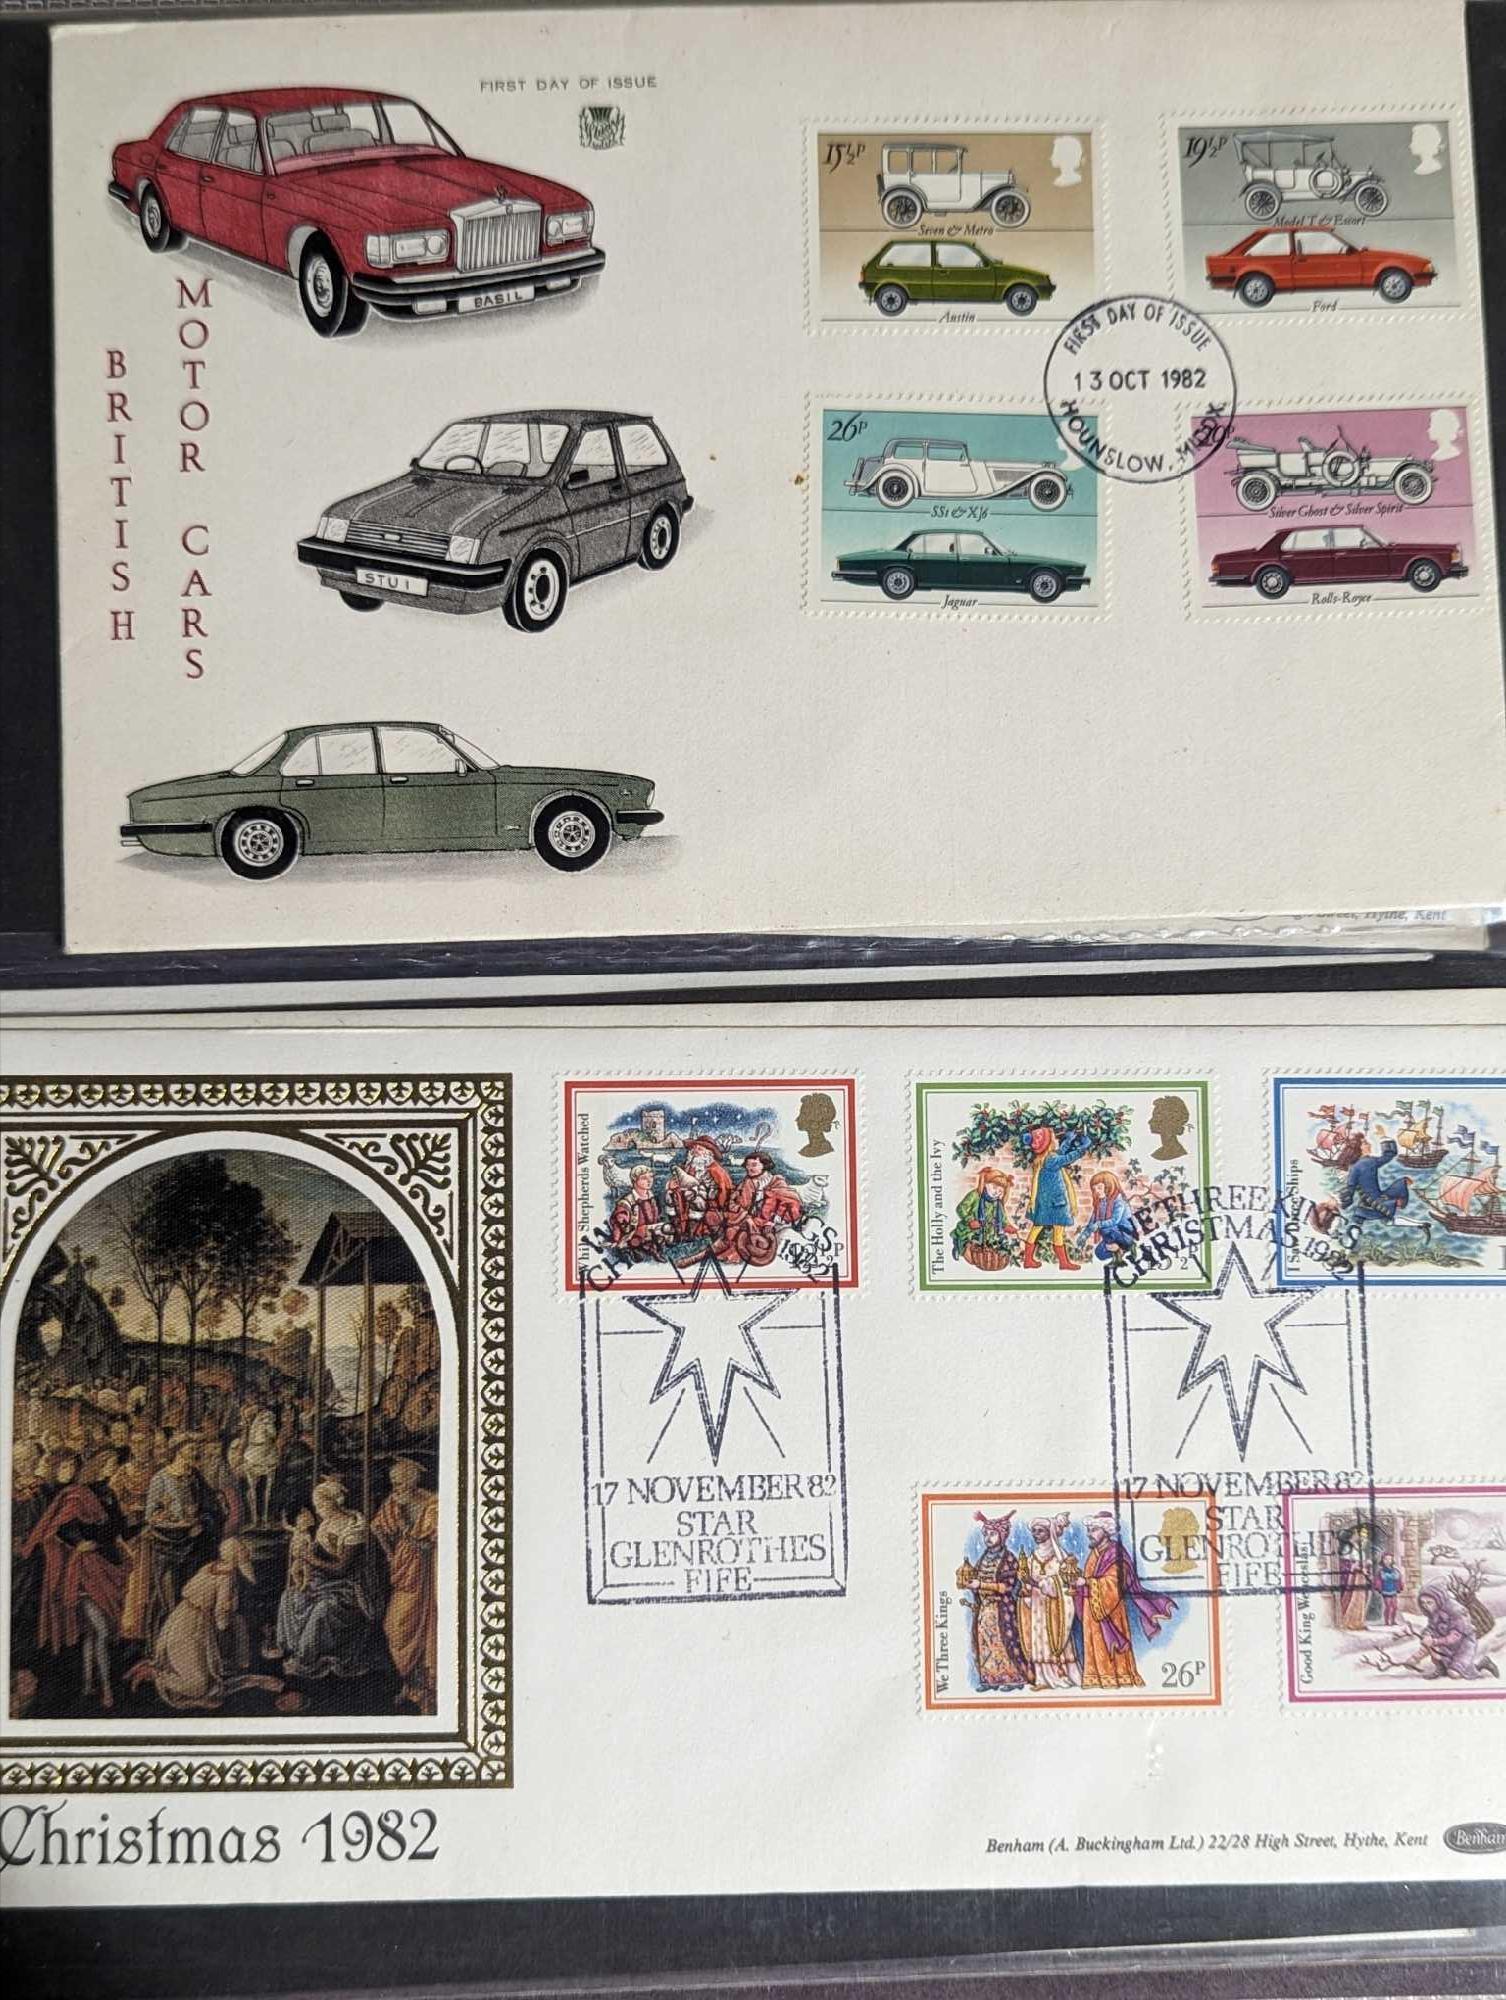 POSTAGE STAMPS - Commemorative First Day Covers c. - Image 11 of 17